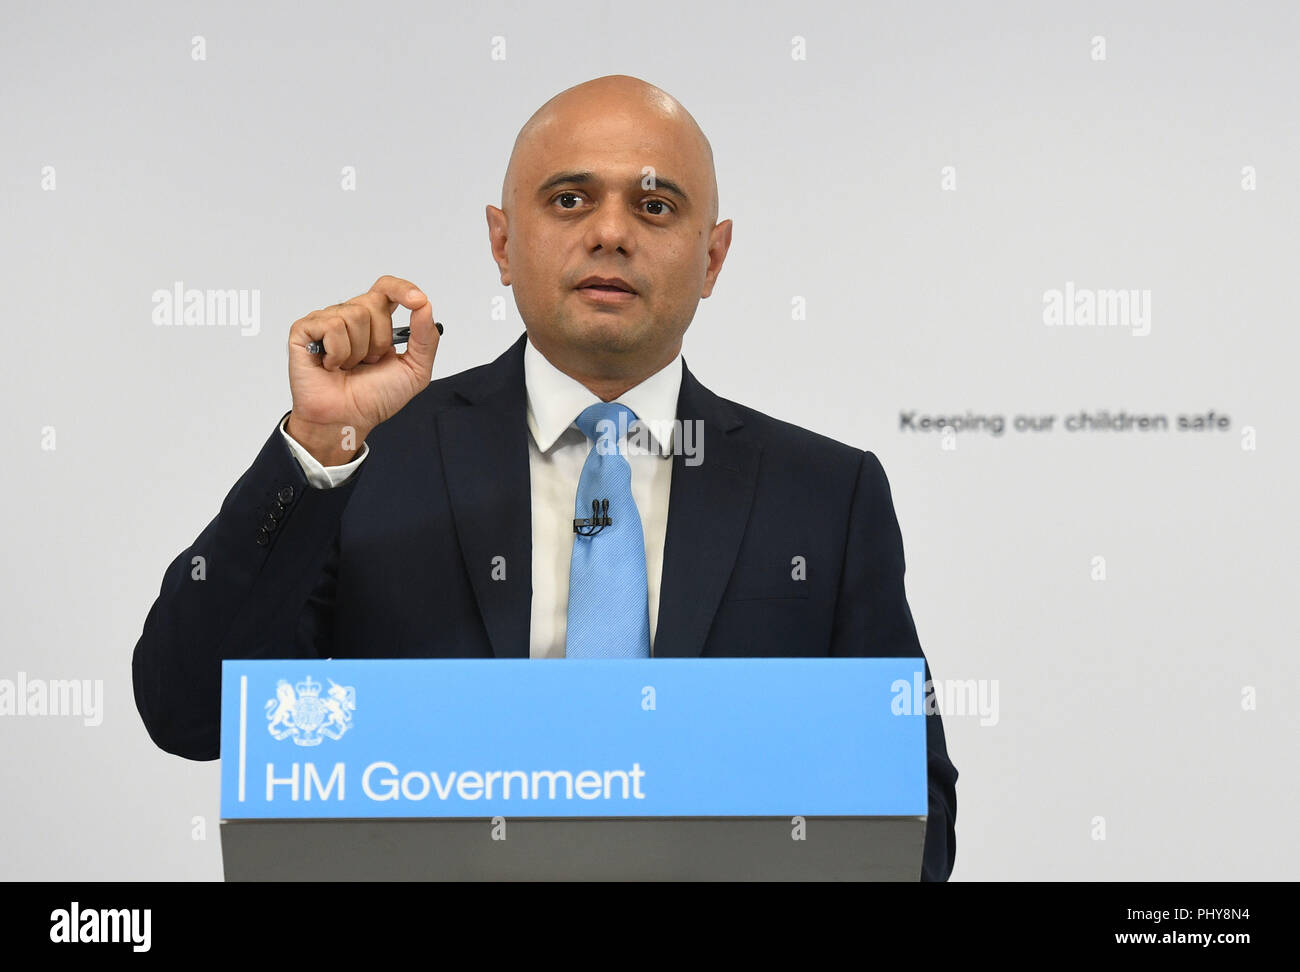 Home Secretary Sajid Javid speaking at the Home Office in London where he described his shock at discovering the scale of the danger posed by paedophiles on the internet and outlined his 'personal mission' to tackle child abuse in all its forms. Stock Photo